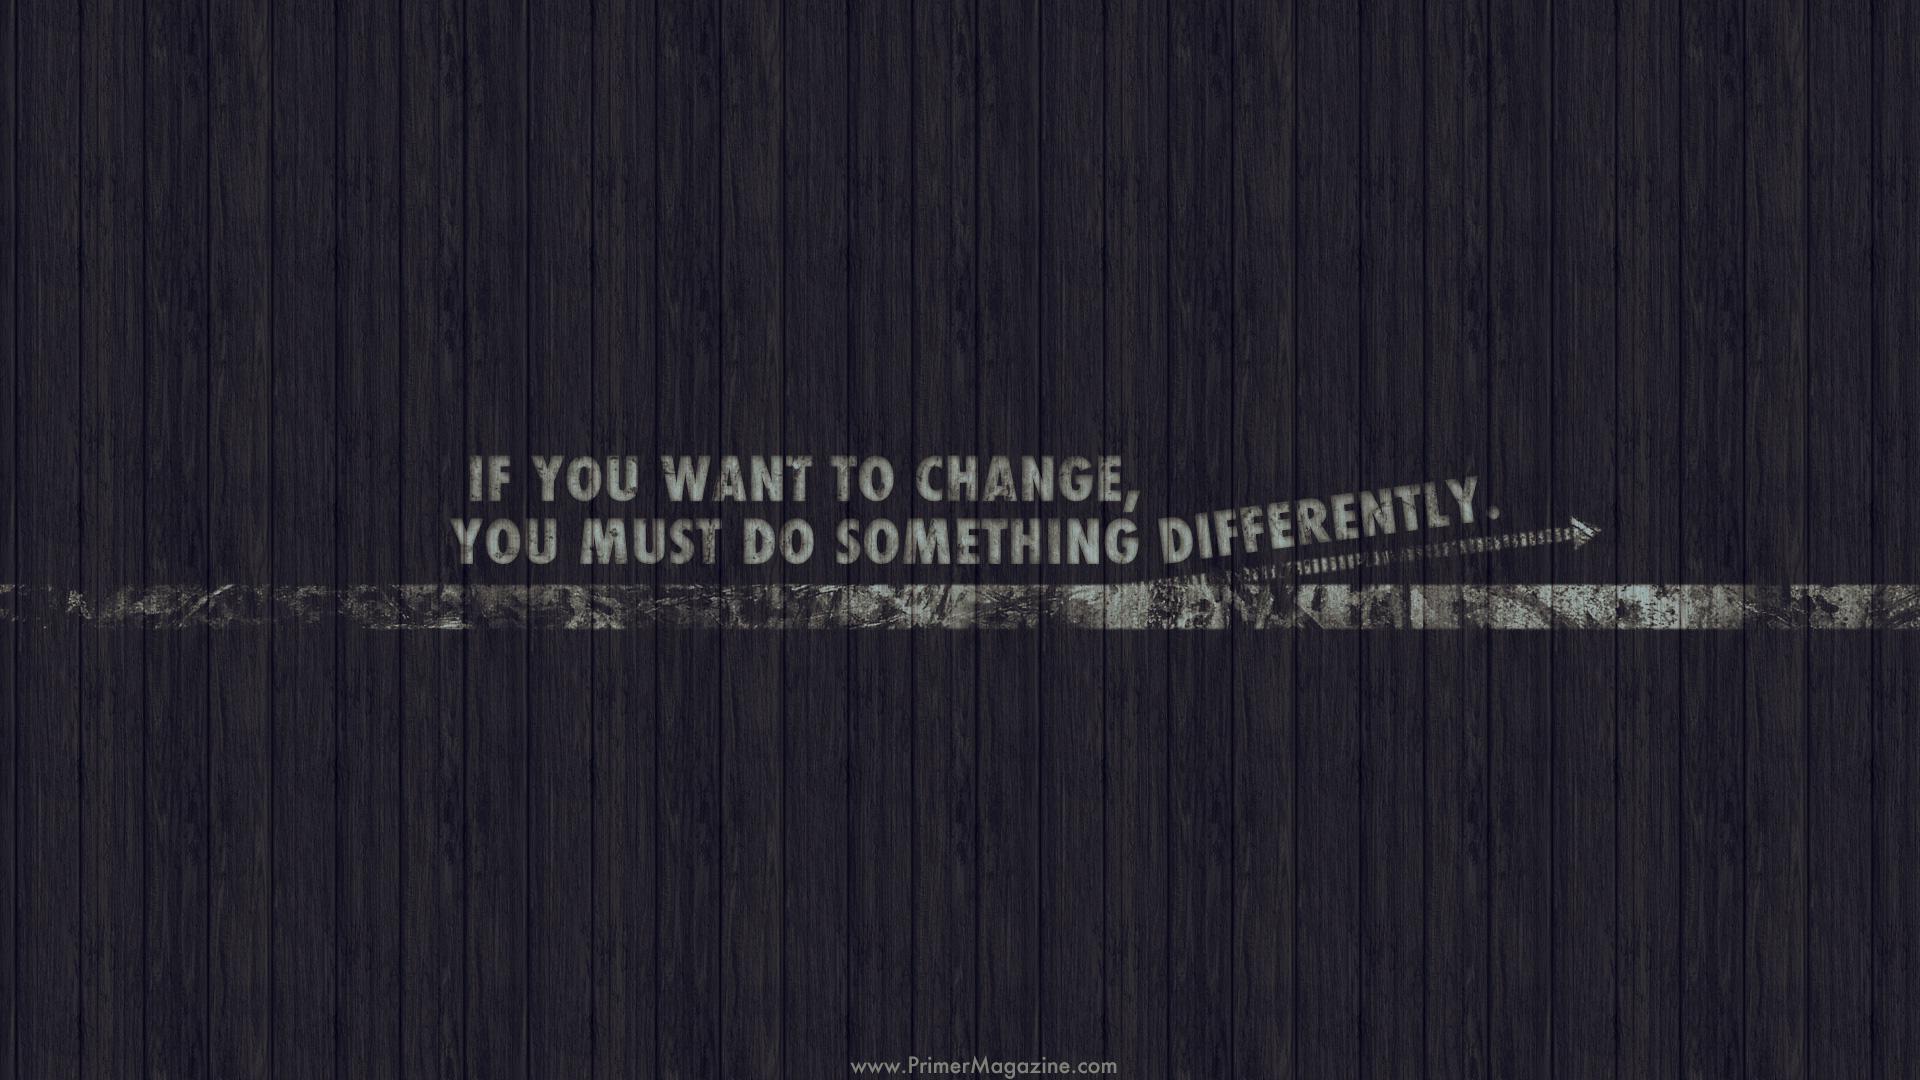 Motivational Wallpaper: Creating Change in Our Lives